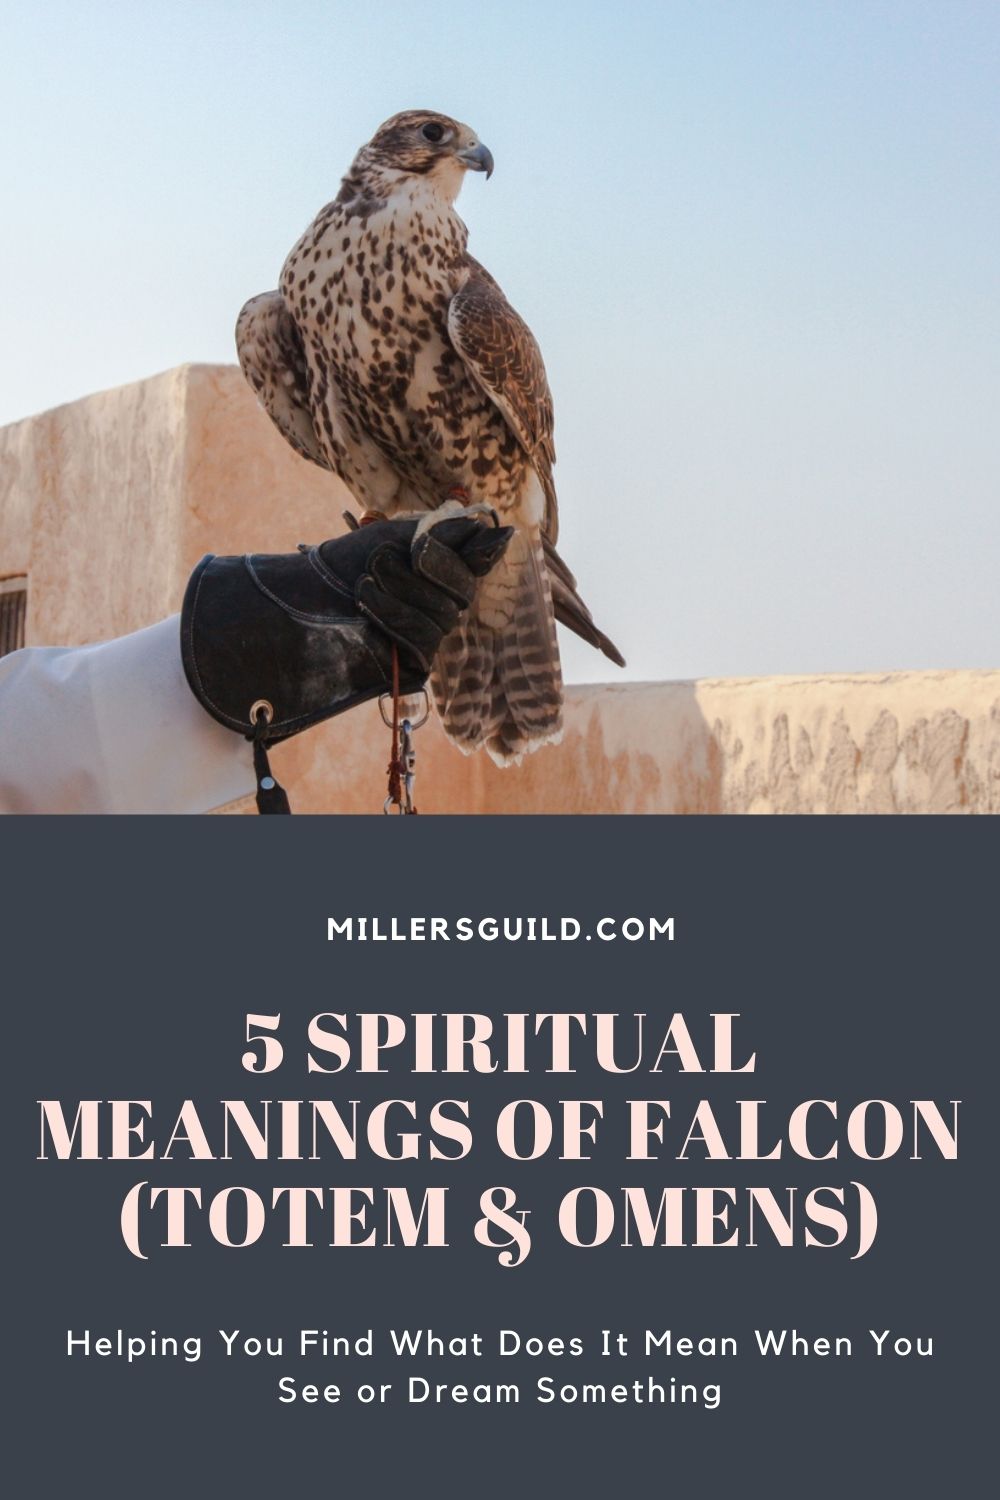 5 Spiritual Meanings of Falcon (Totem & Omens) 2